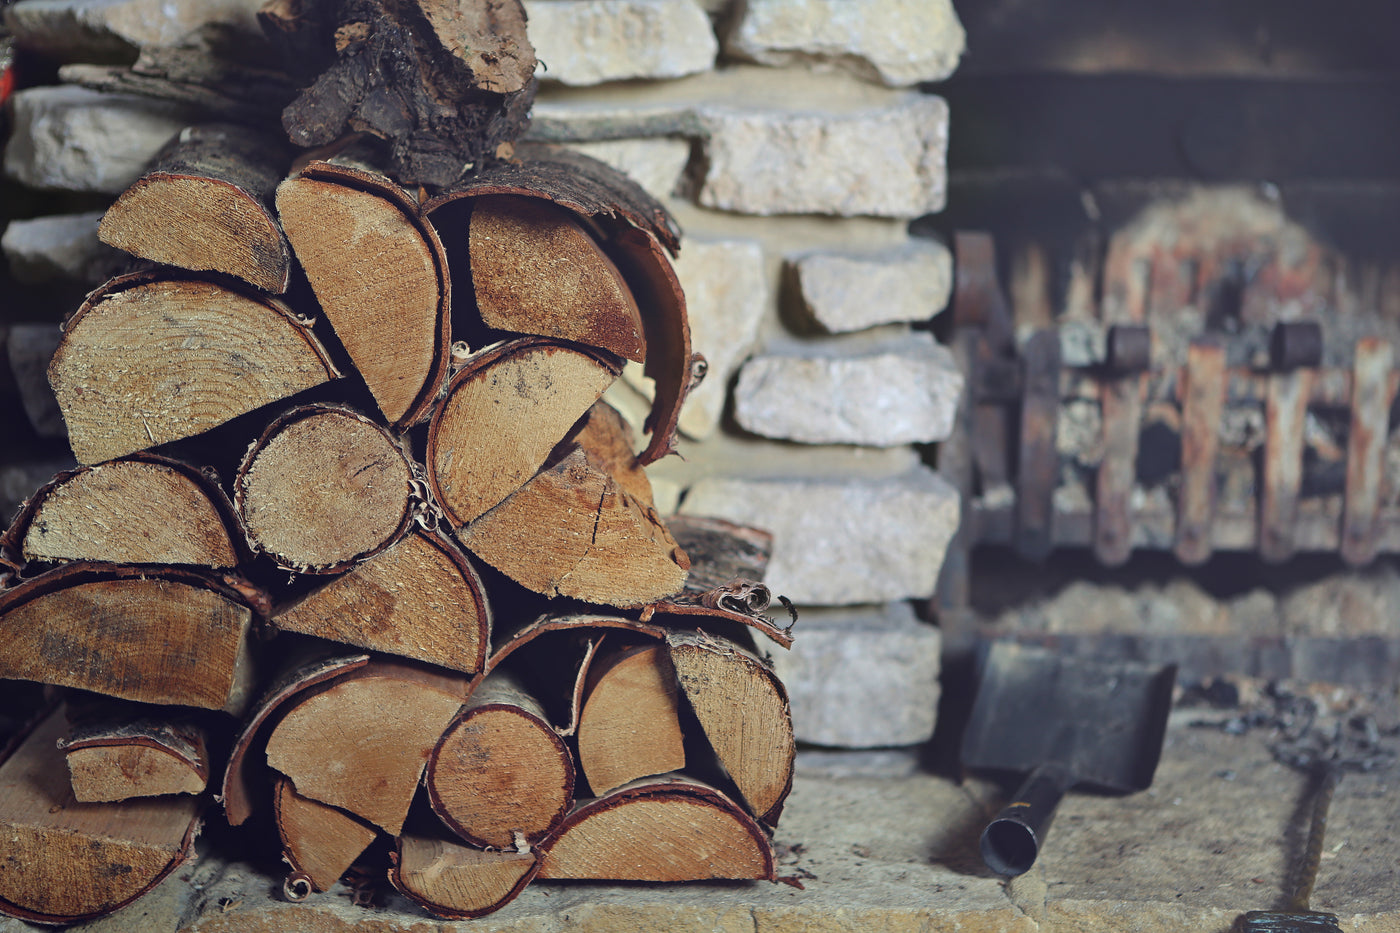 How to spot the best firewood for your stove